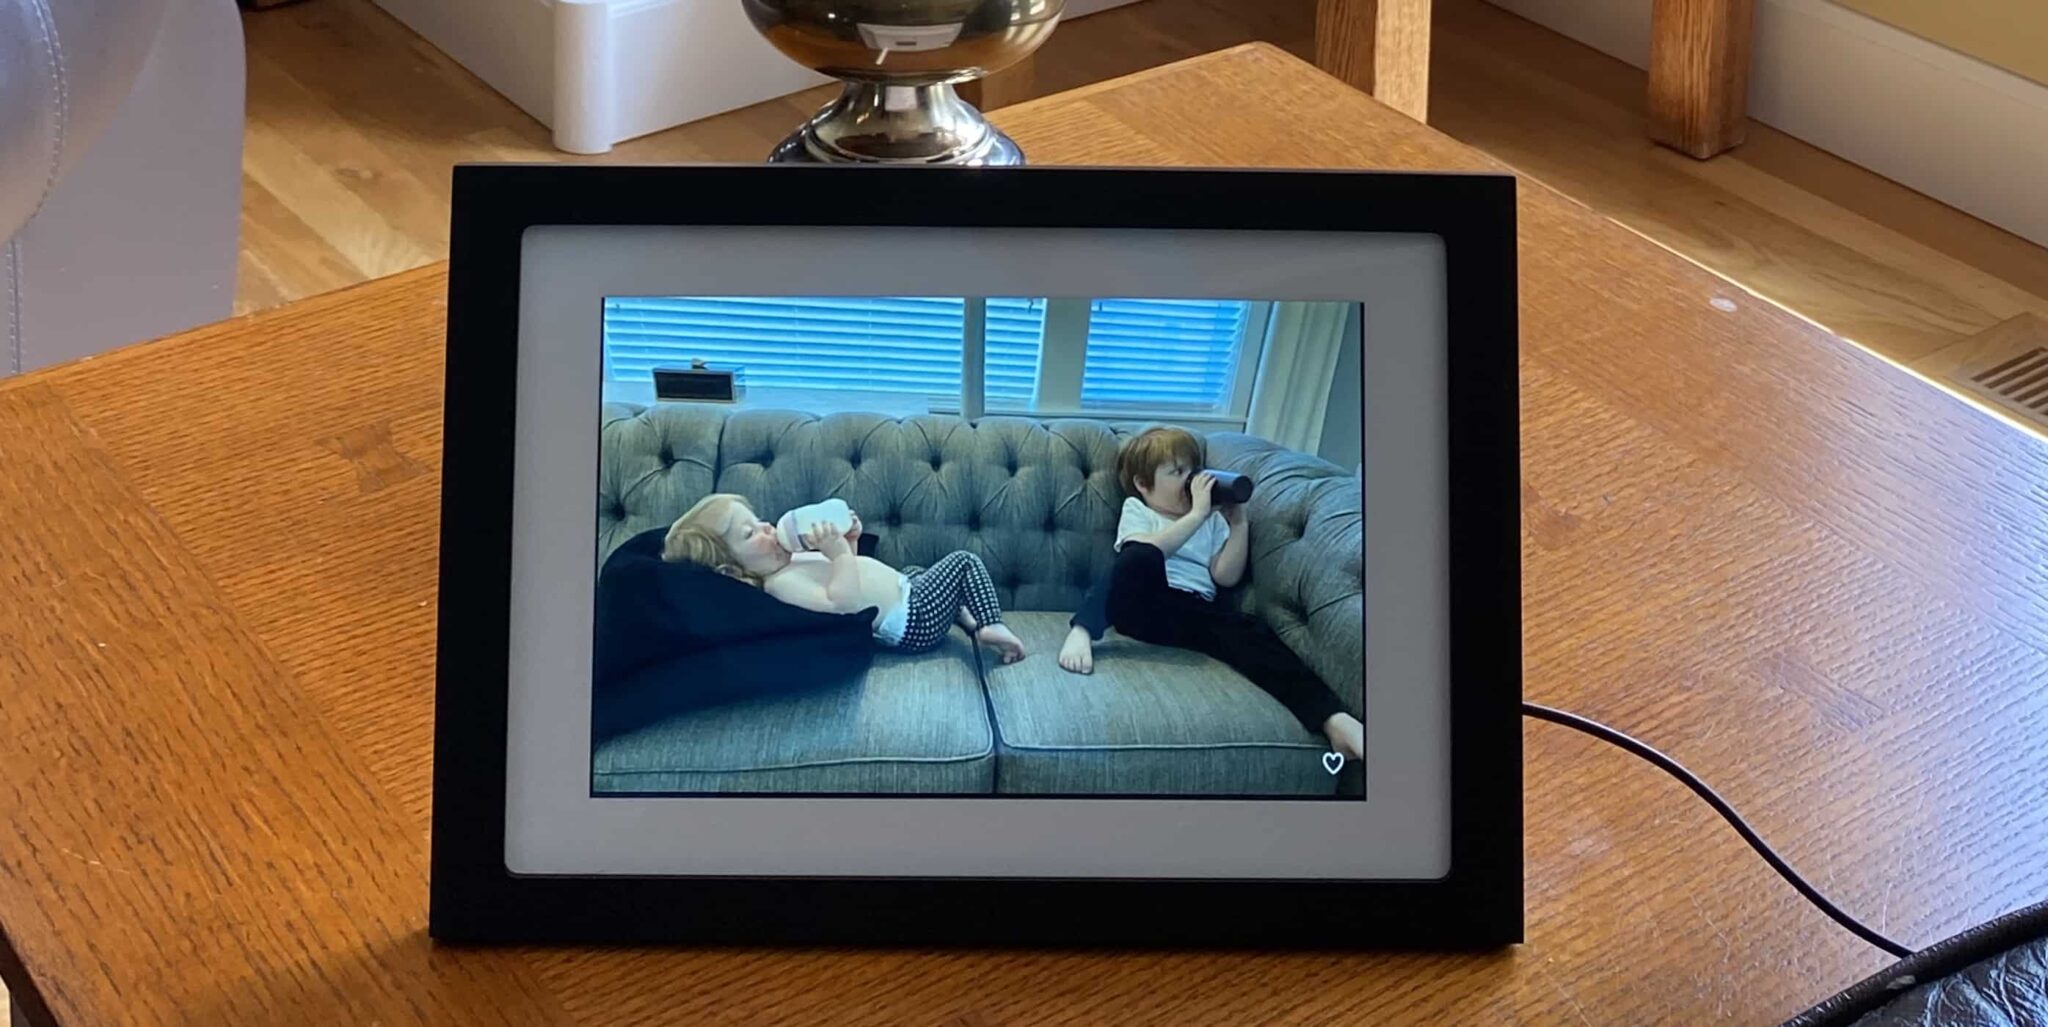 Skylight Frame Review: The Very Best WiFi Picture Frame?